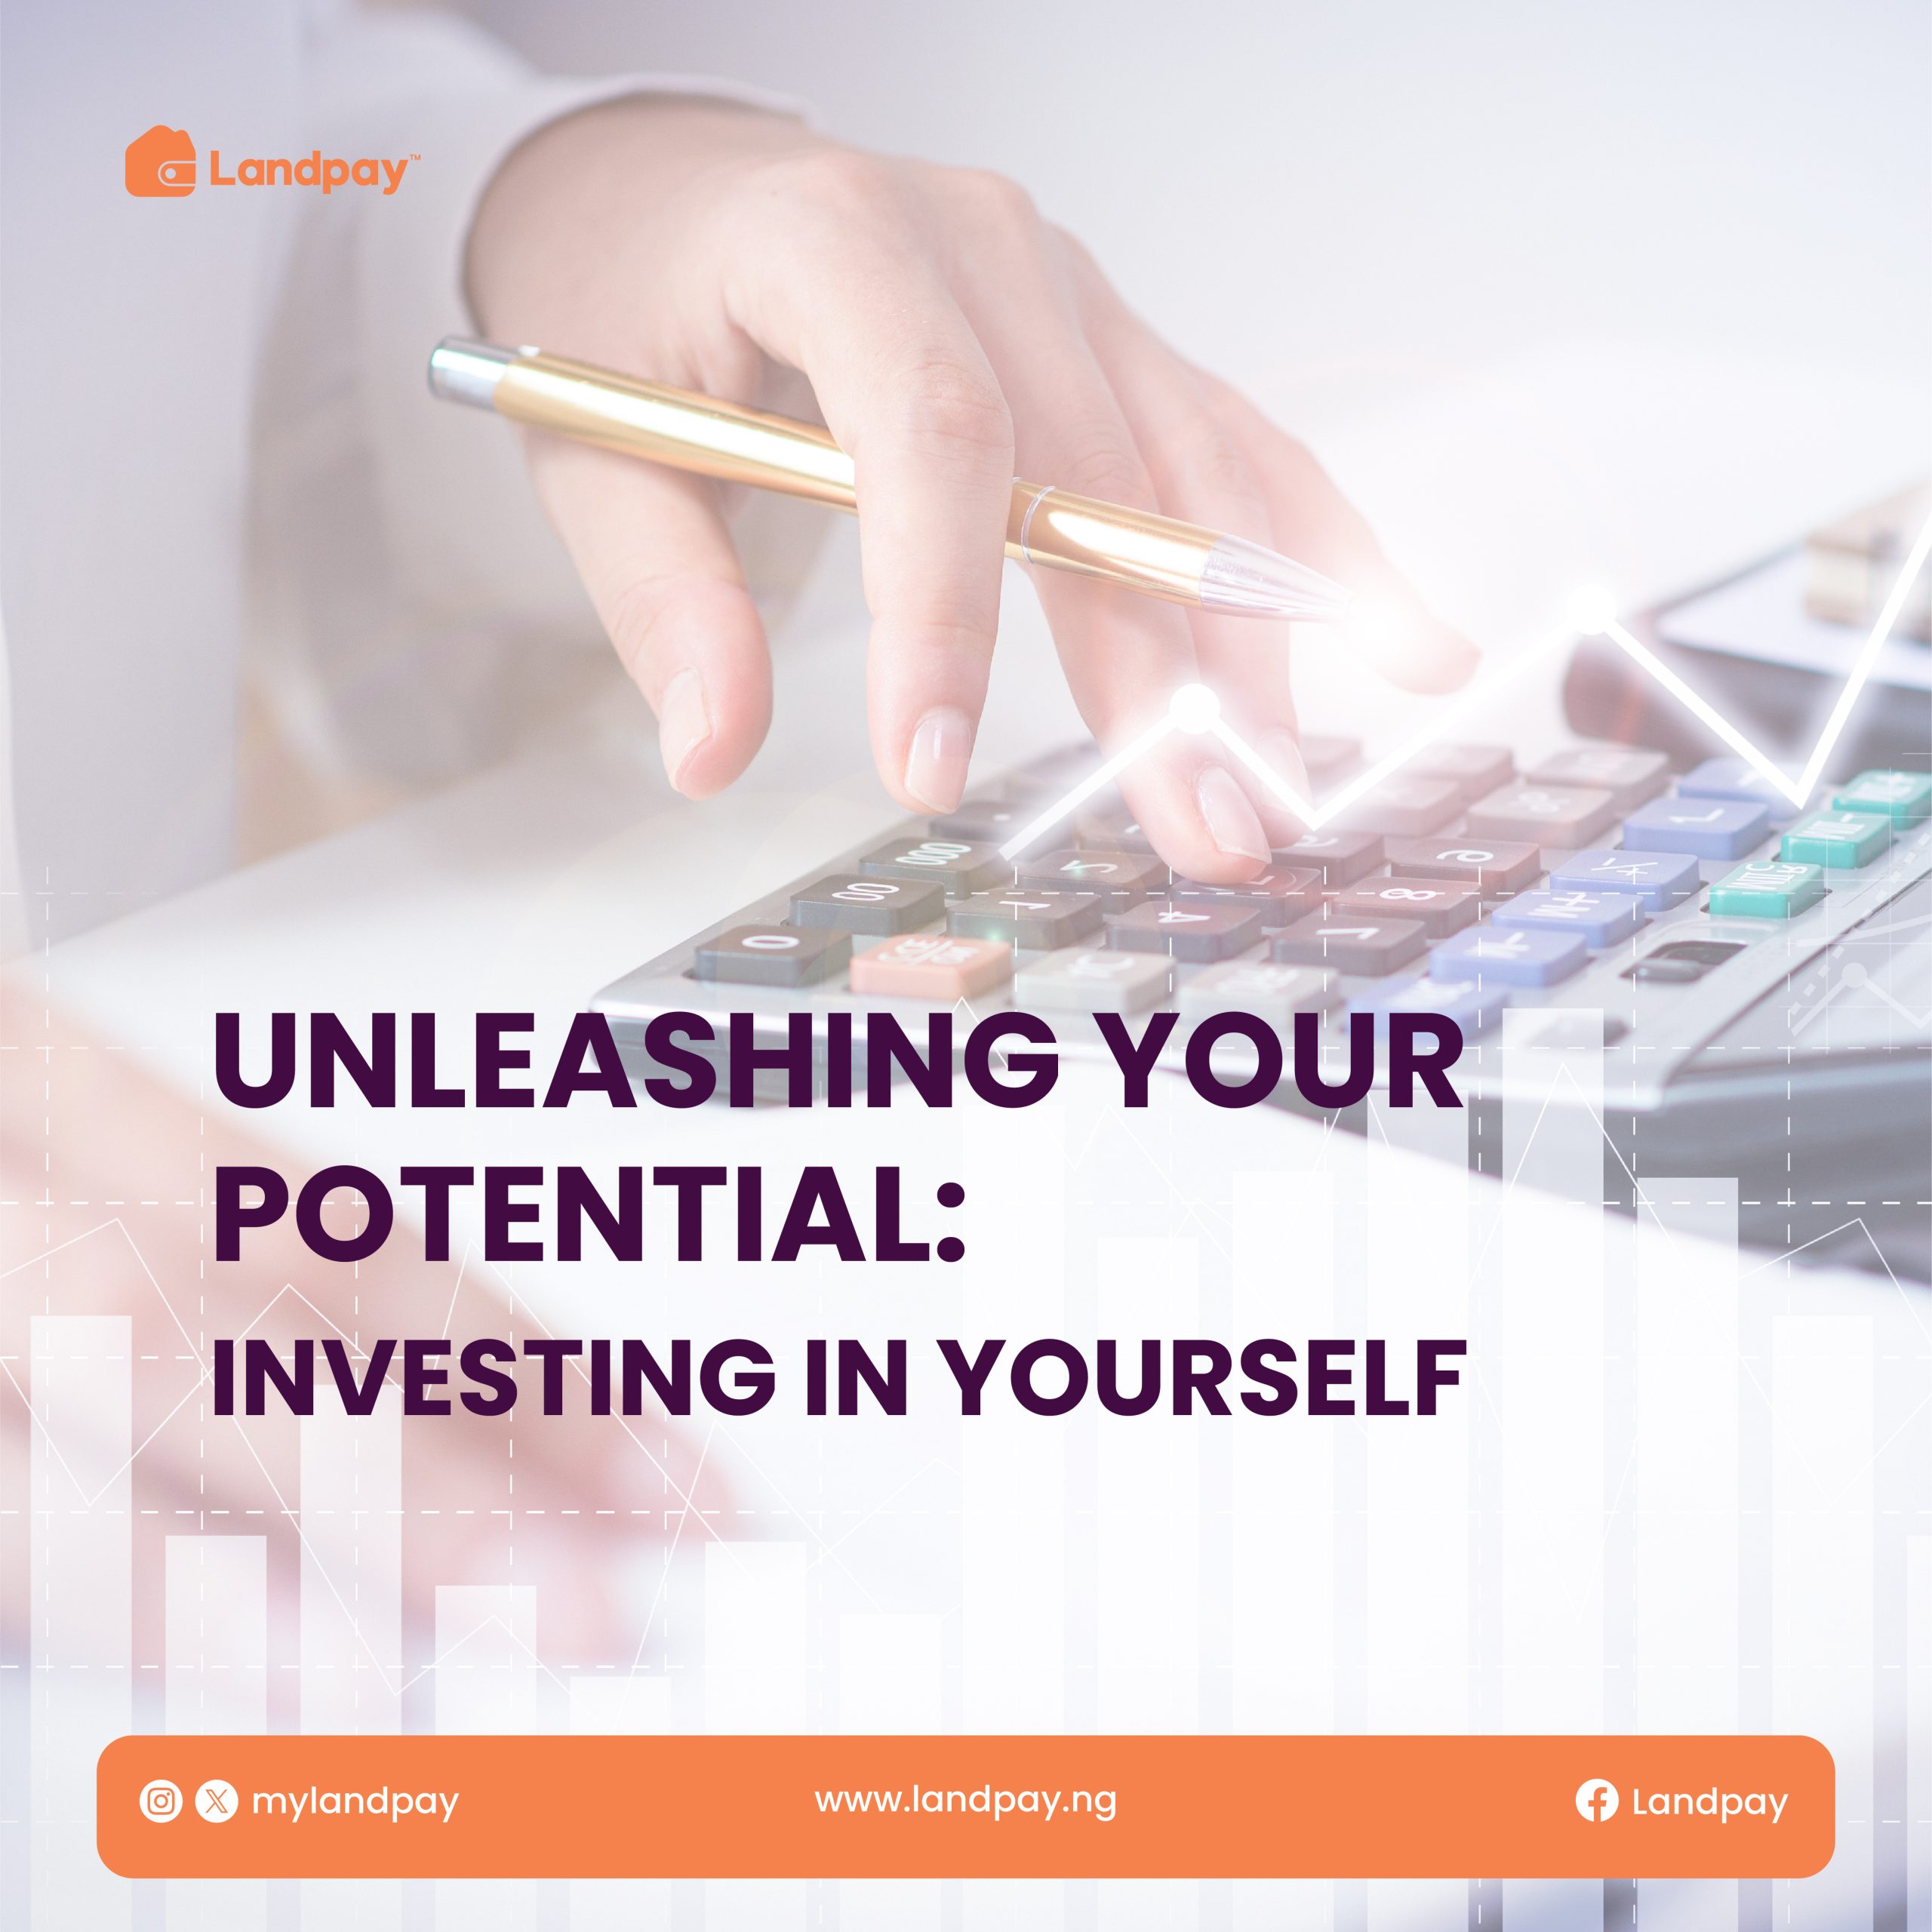 UNLEASHING YOUR POTENTIAL: INVESTING IN YOURSELF